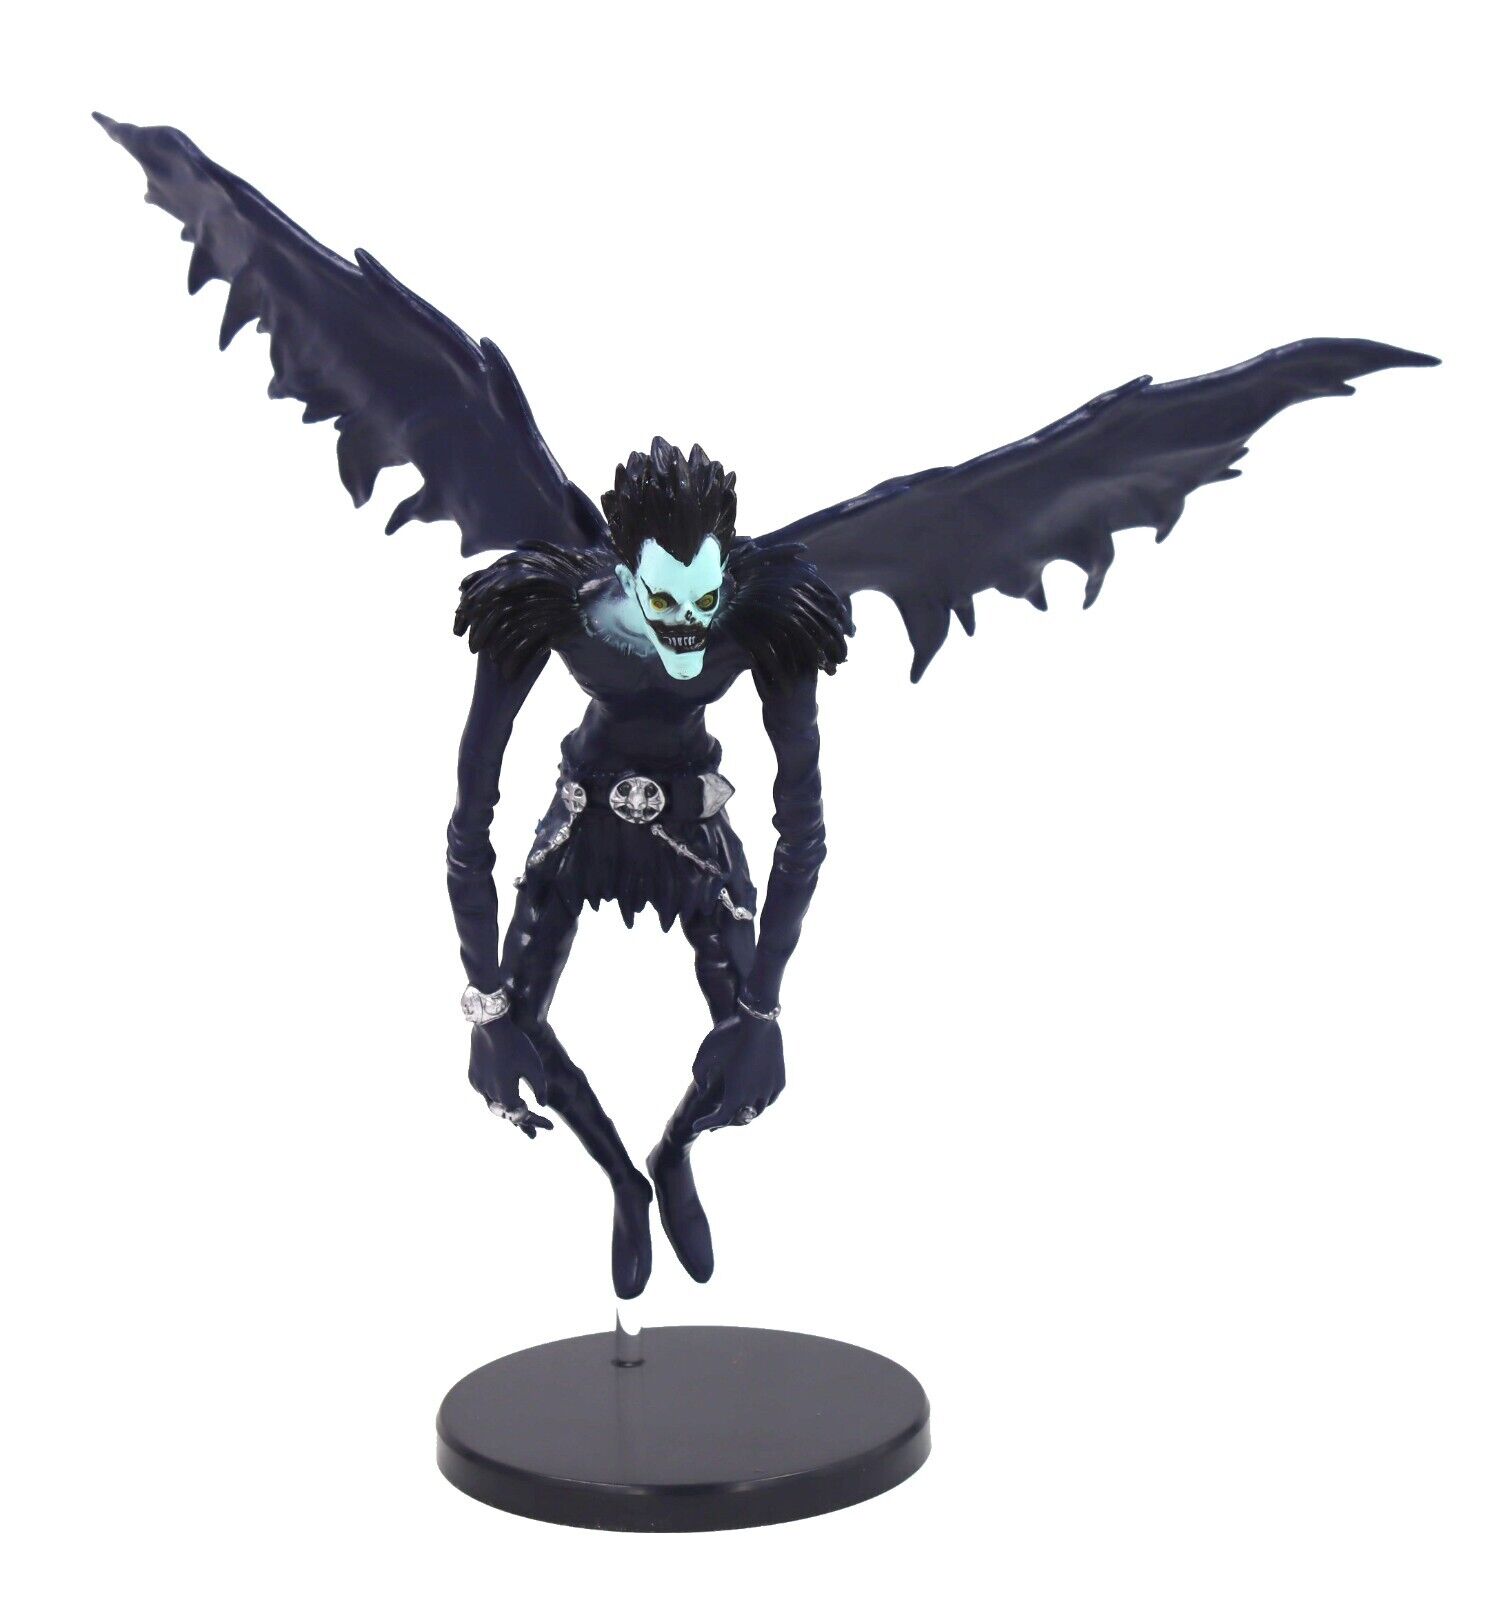 Death Note Ryuk Anime Figure PVC for Anime Fans Gift - 10''